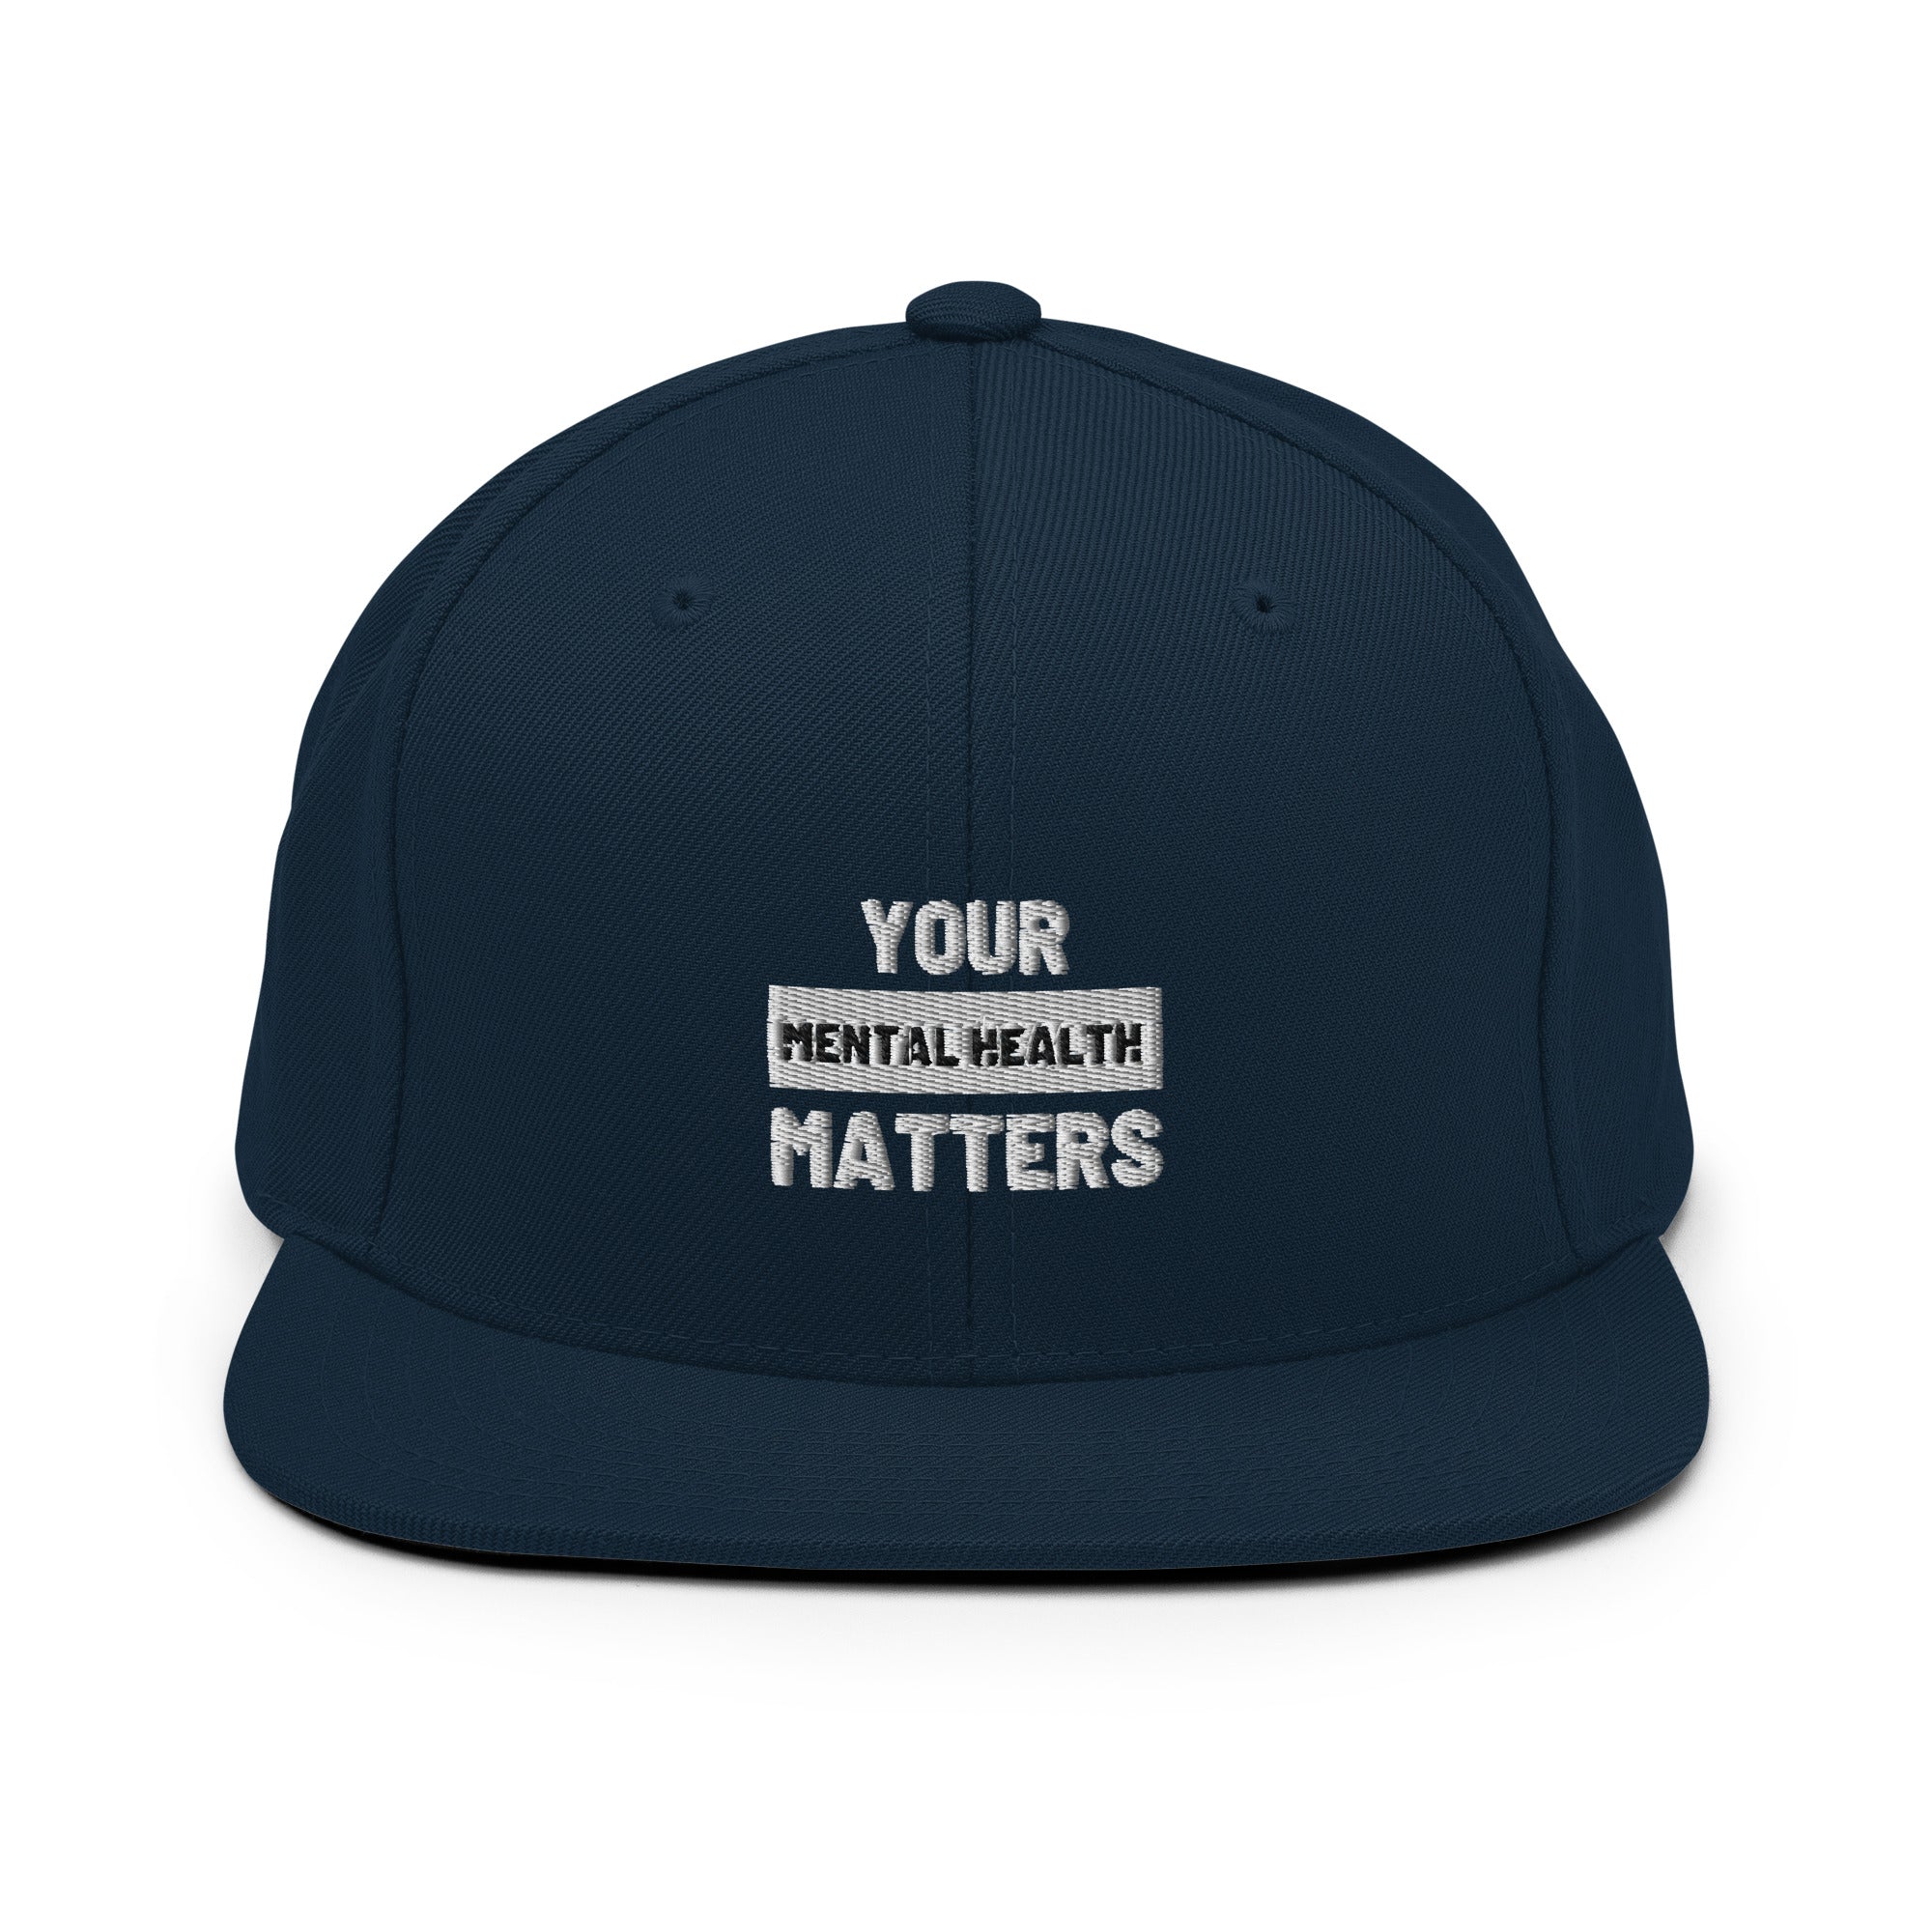 YOUR MH Matters Snapback Hat